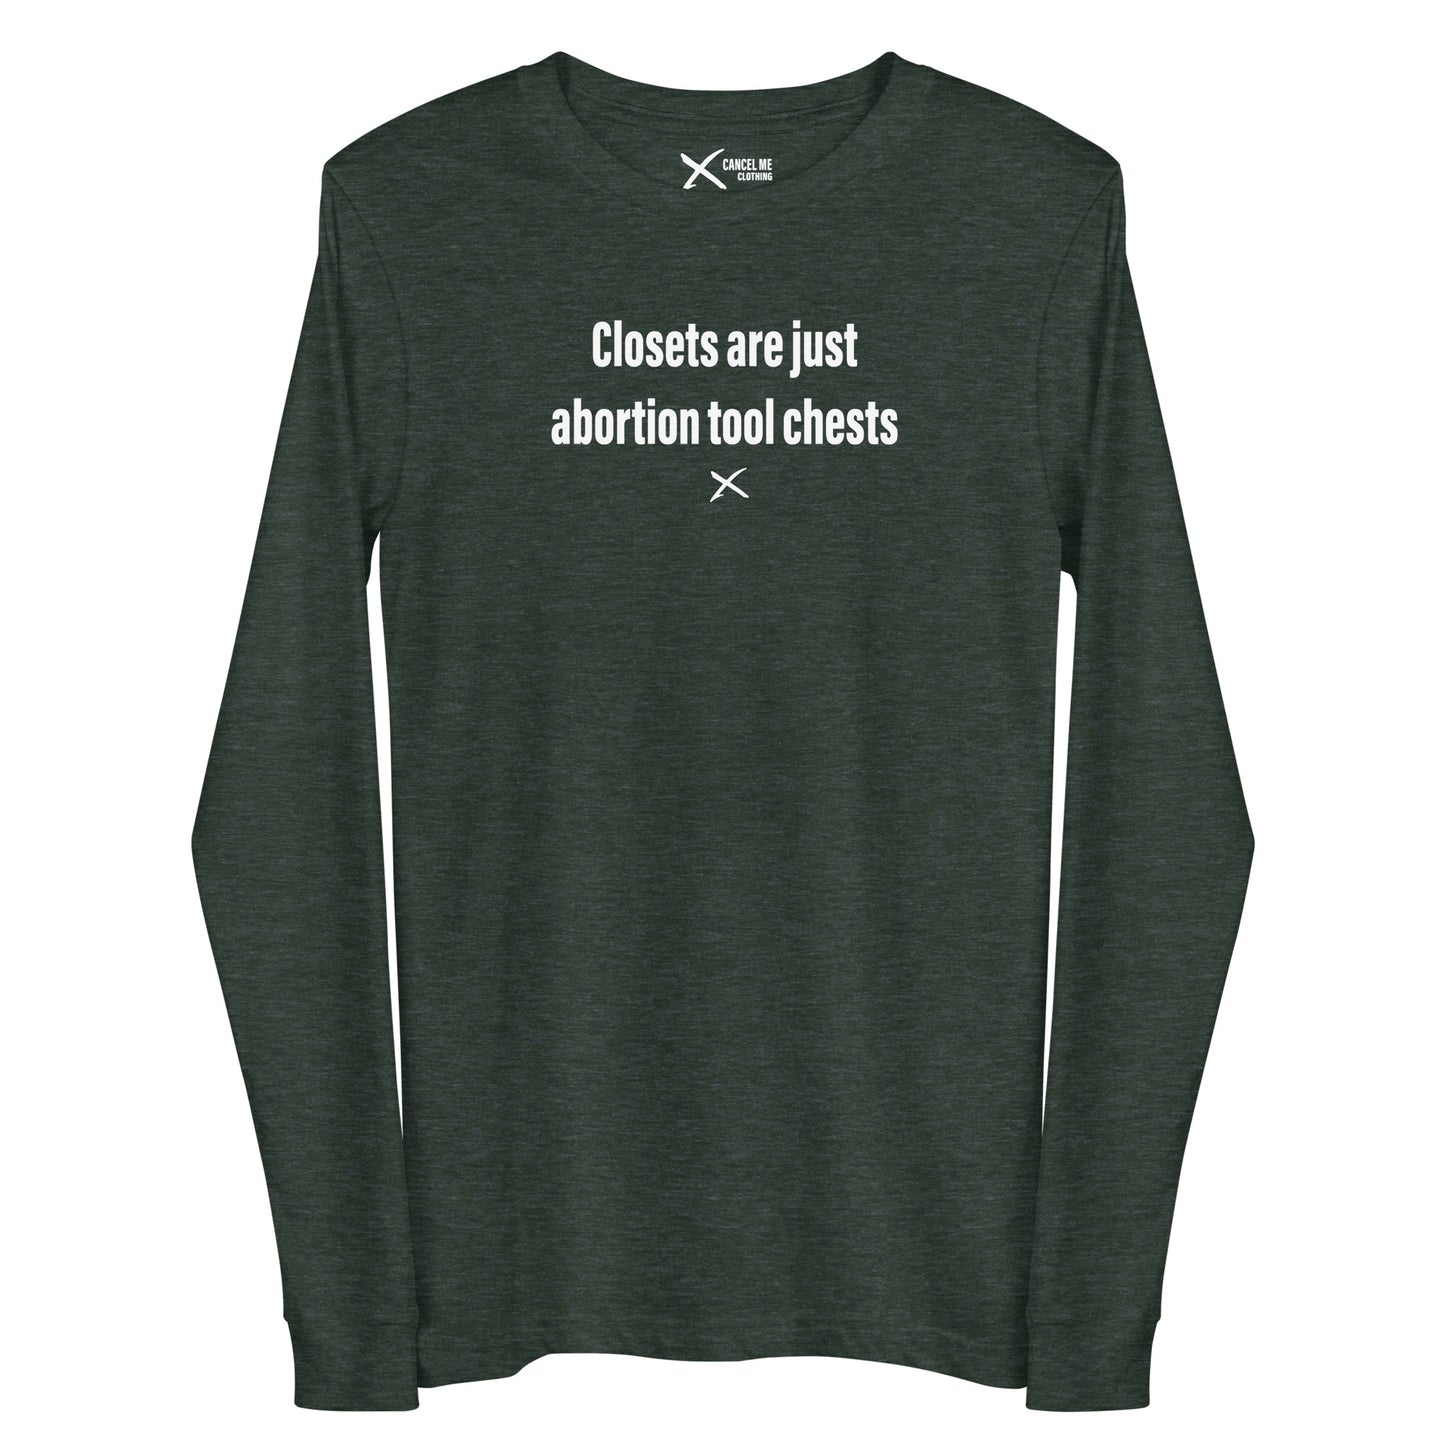 Closets are just abortion tool chests - Longsleeve